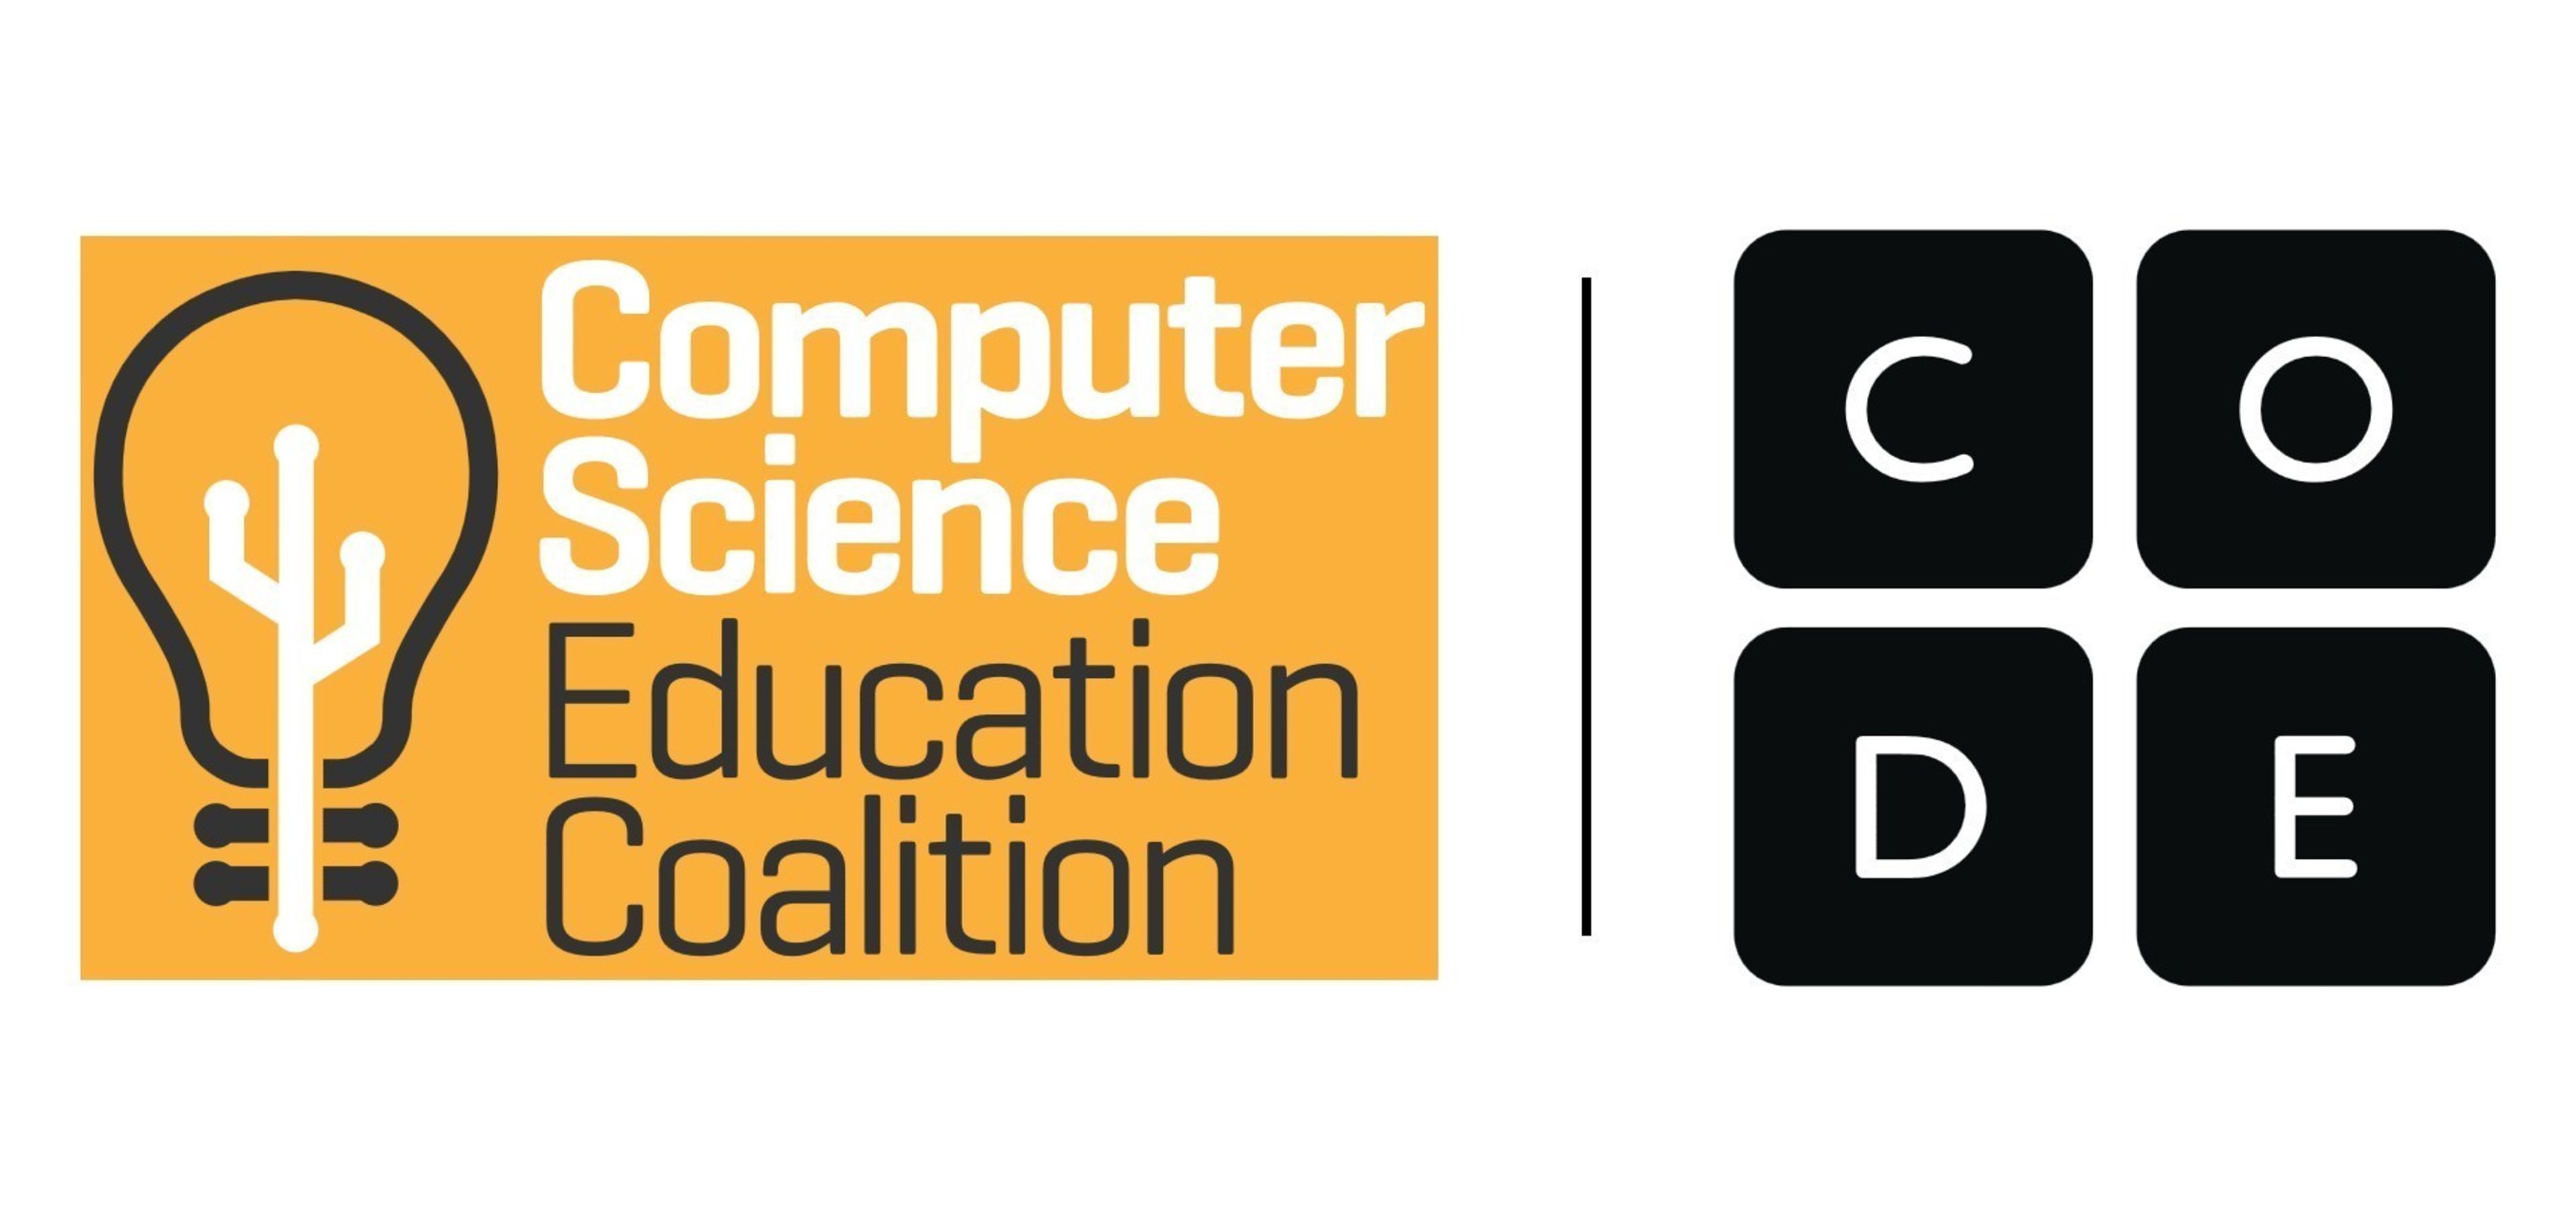 Computer Science Education Coalition and Code.org Logo